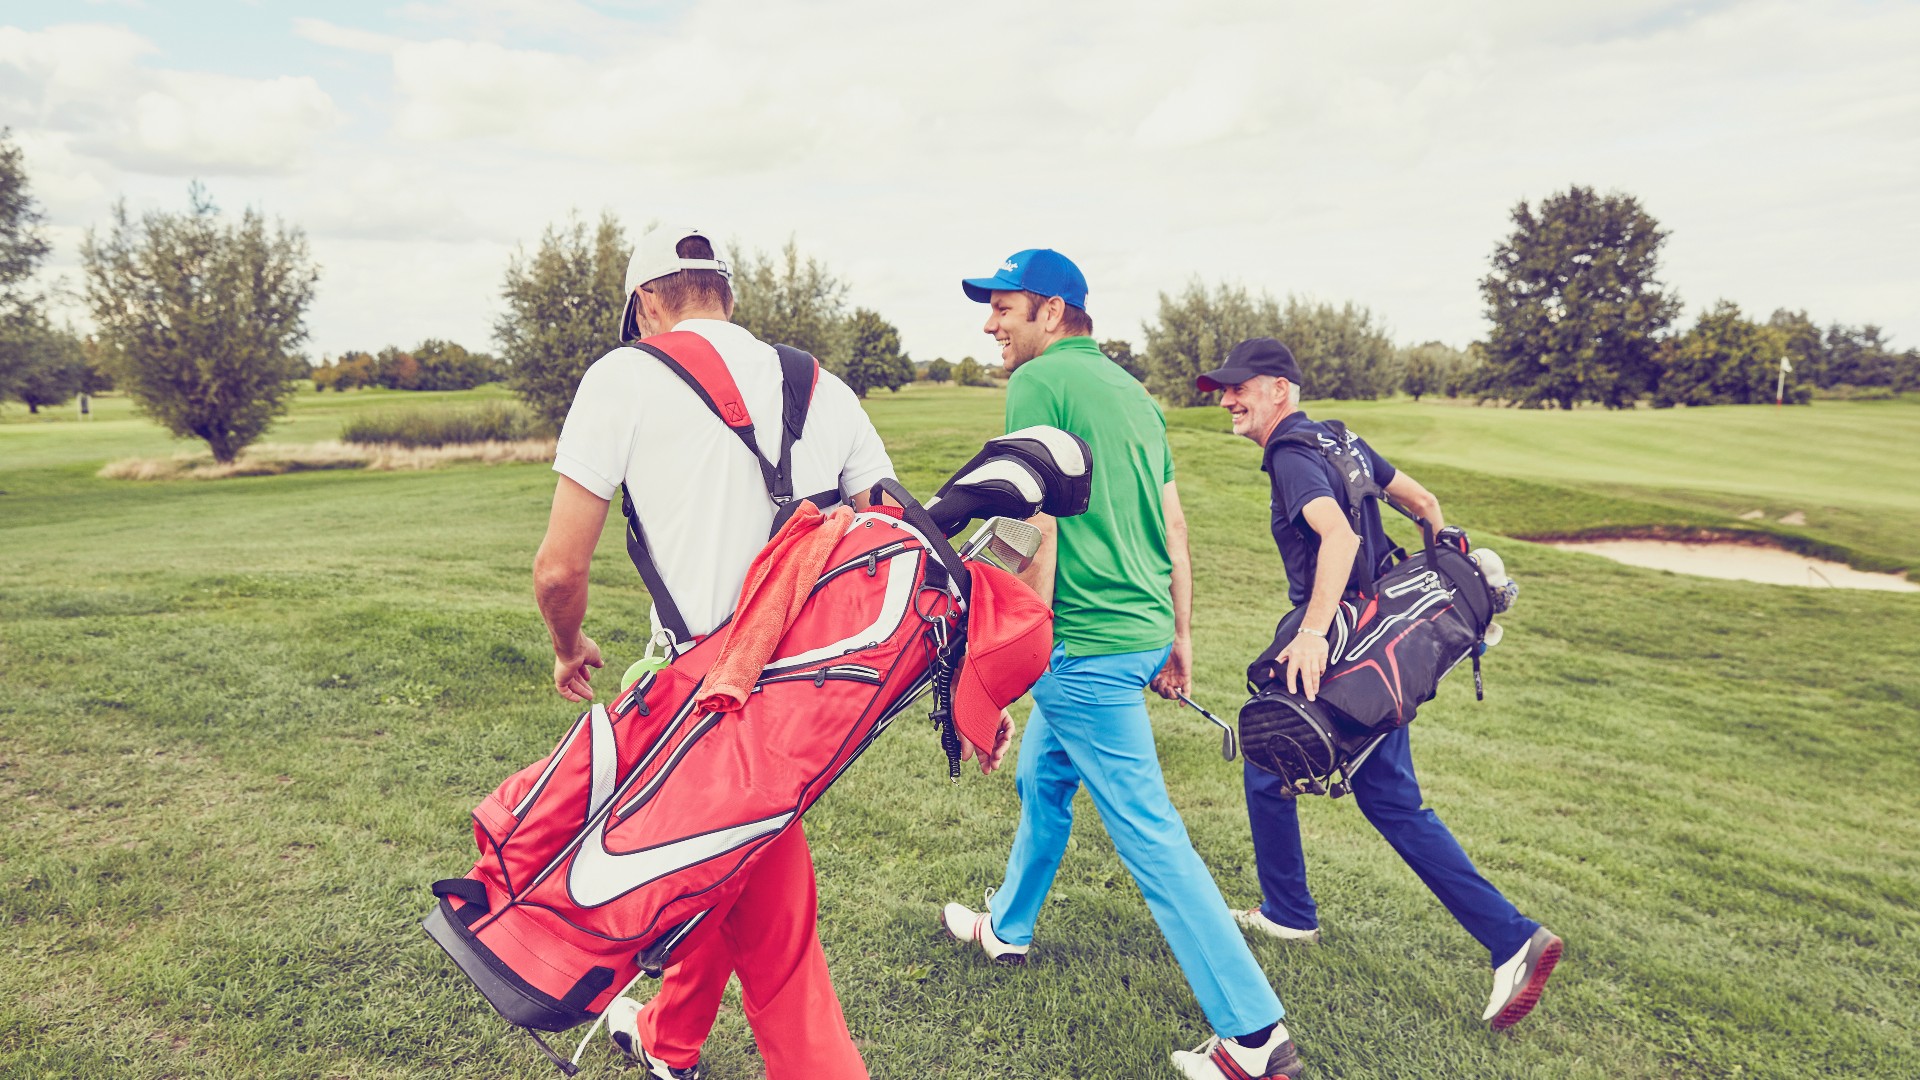 Vessel Prime Staff Bag - Worldwide Golf Shops - Your Golf Store for Golf  Clubs, Golf Shoes & More